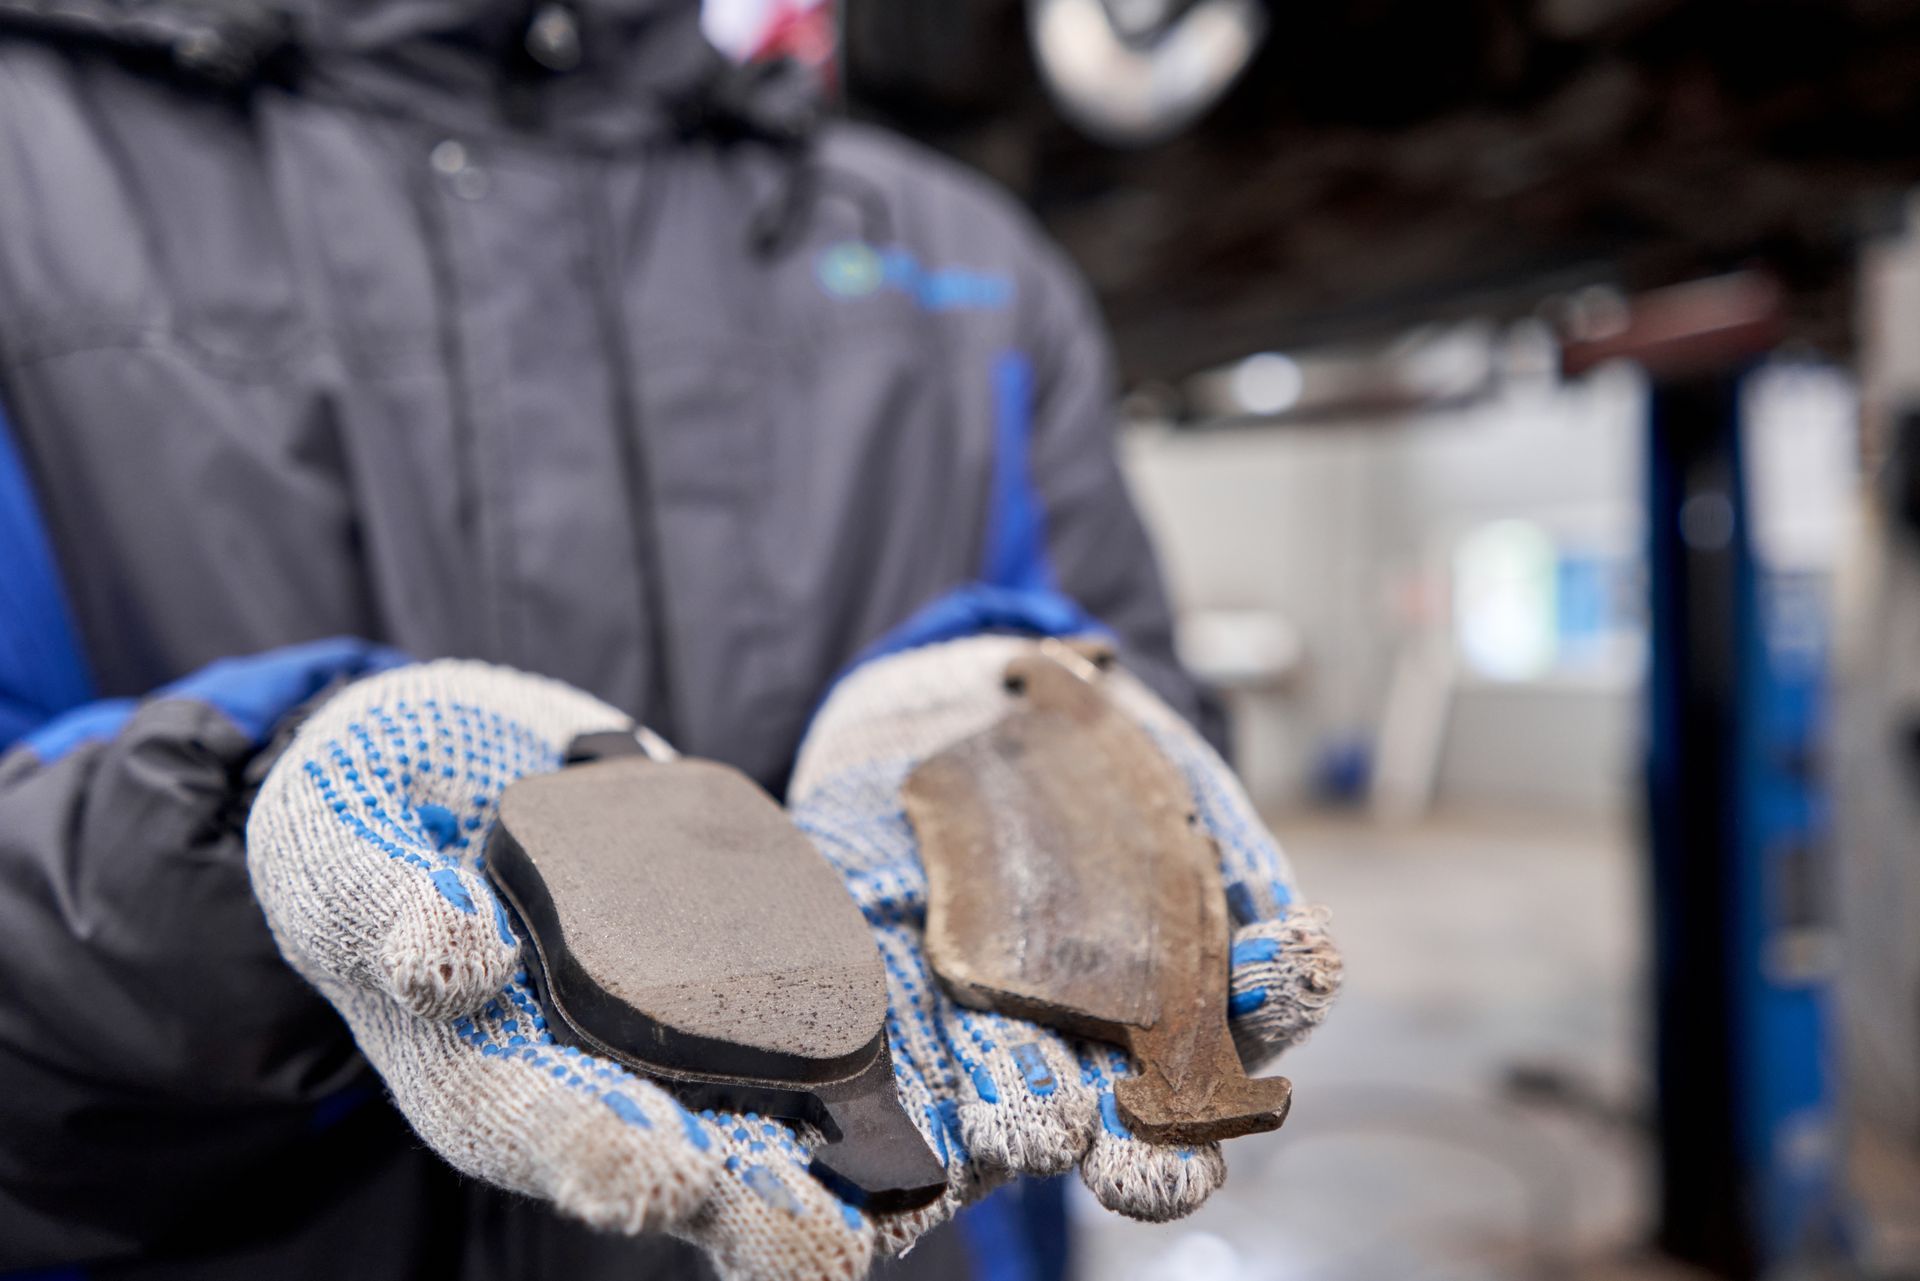 Learn why your brakes wear out quickly and get expert tips to extend their lifespan.